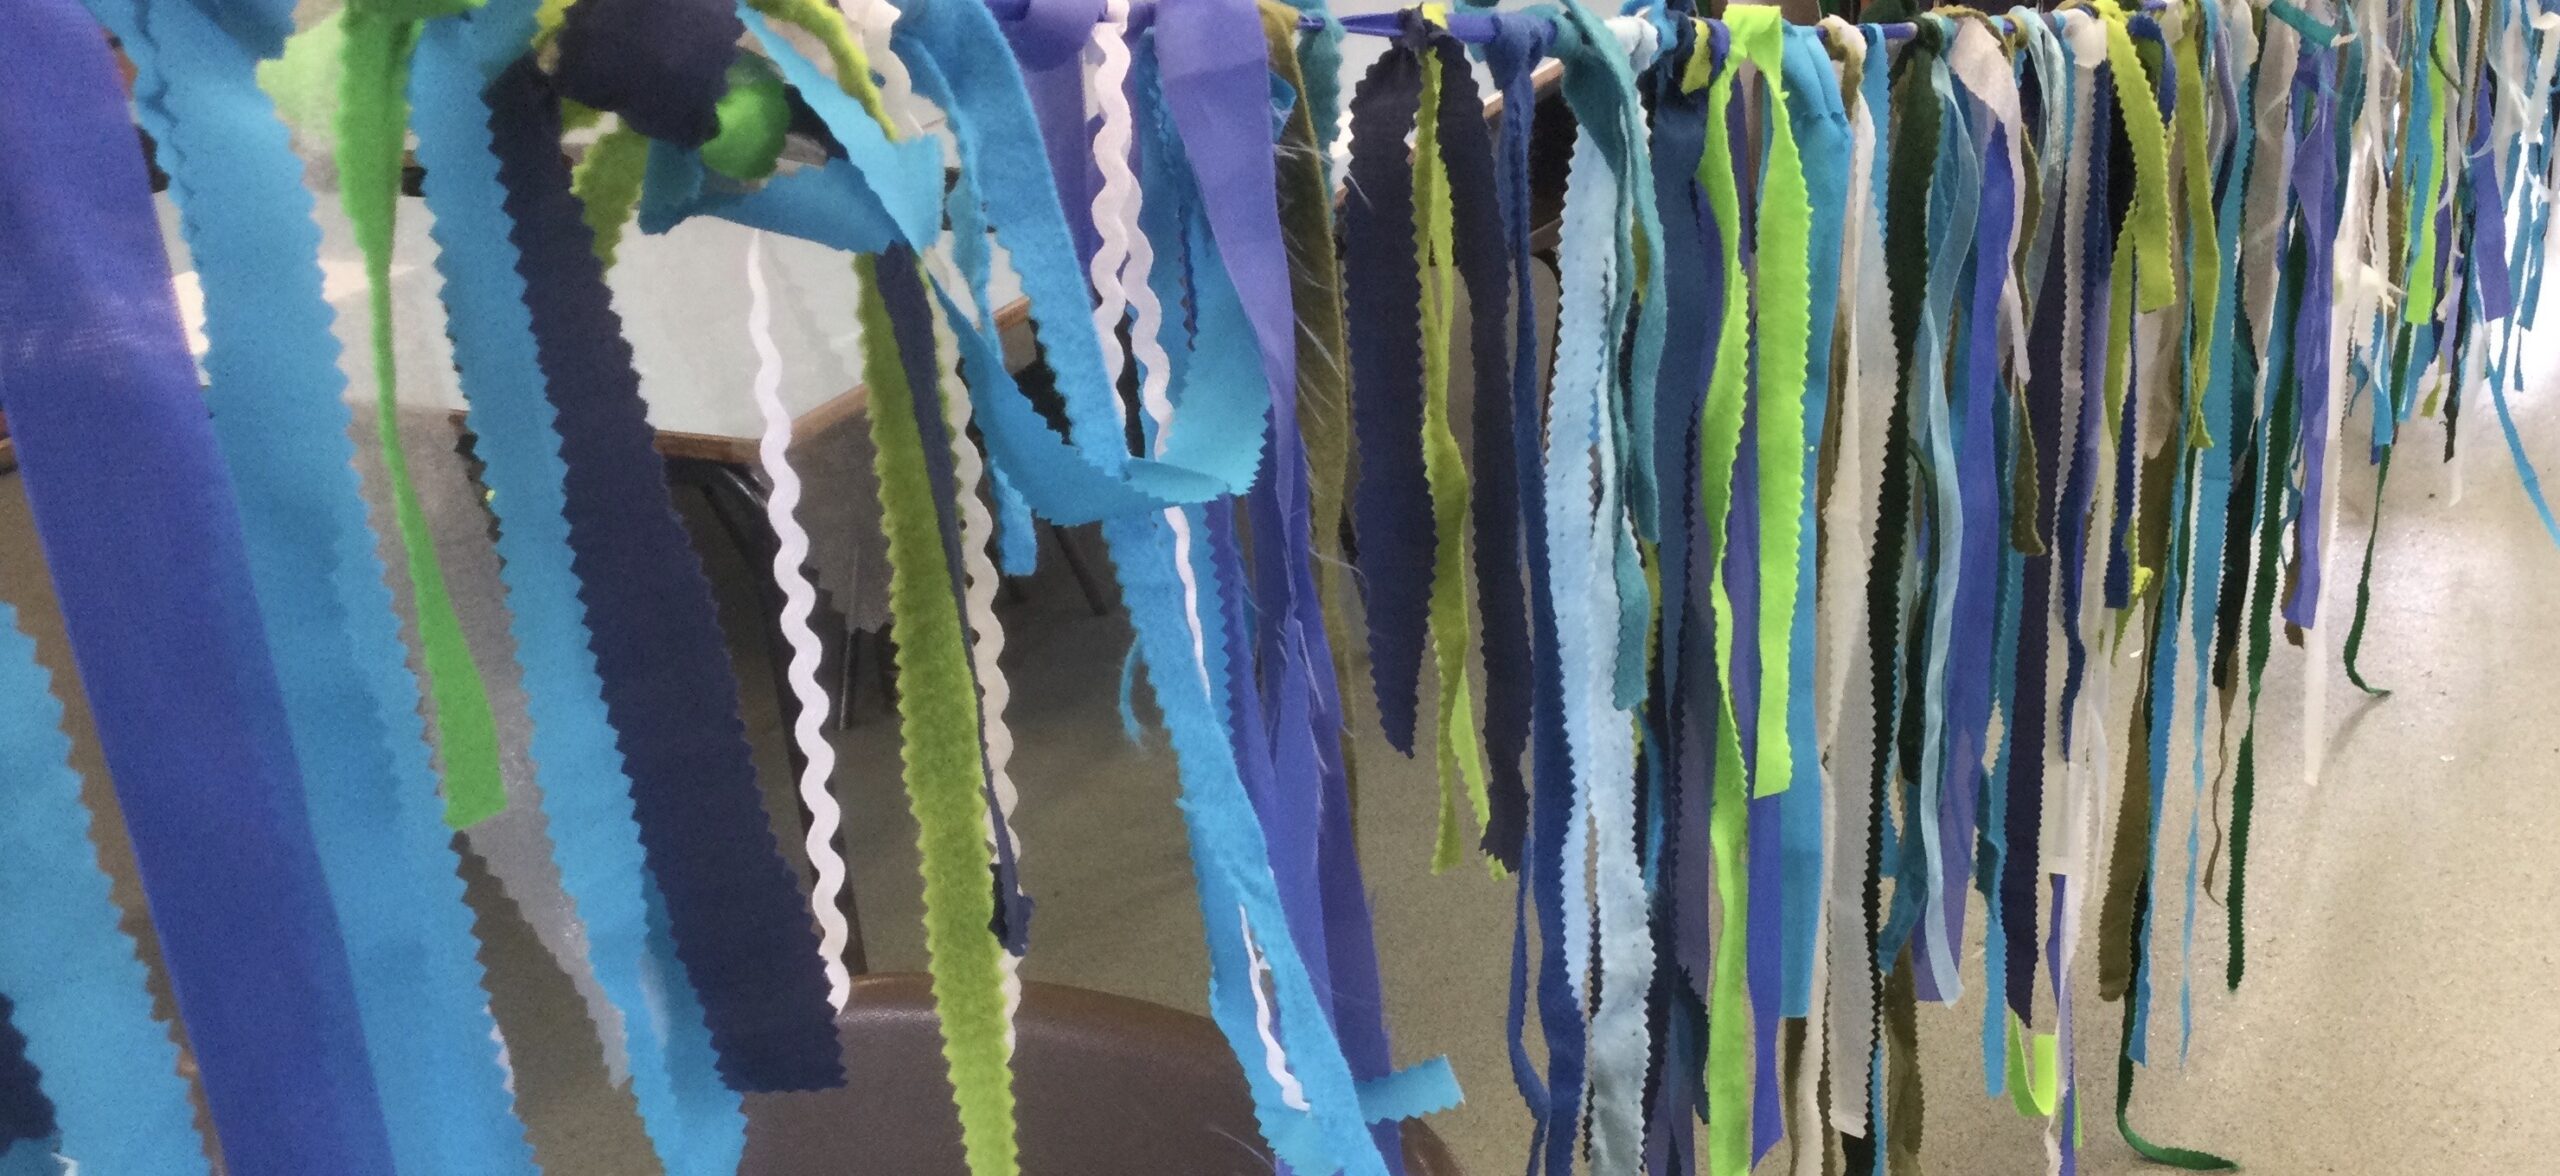 Lengths of material in different shades of blue and green, with additions of white ricrac ribbon, tied to a thick blue tape to create sea bunting